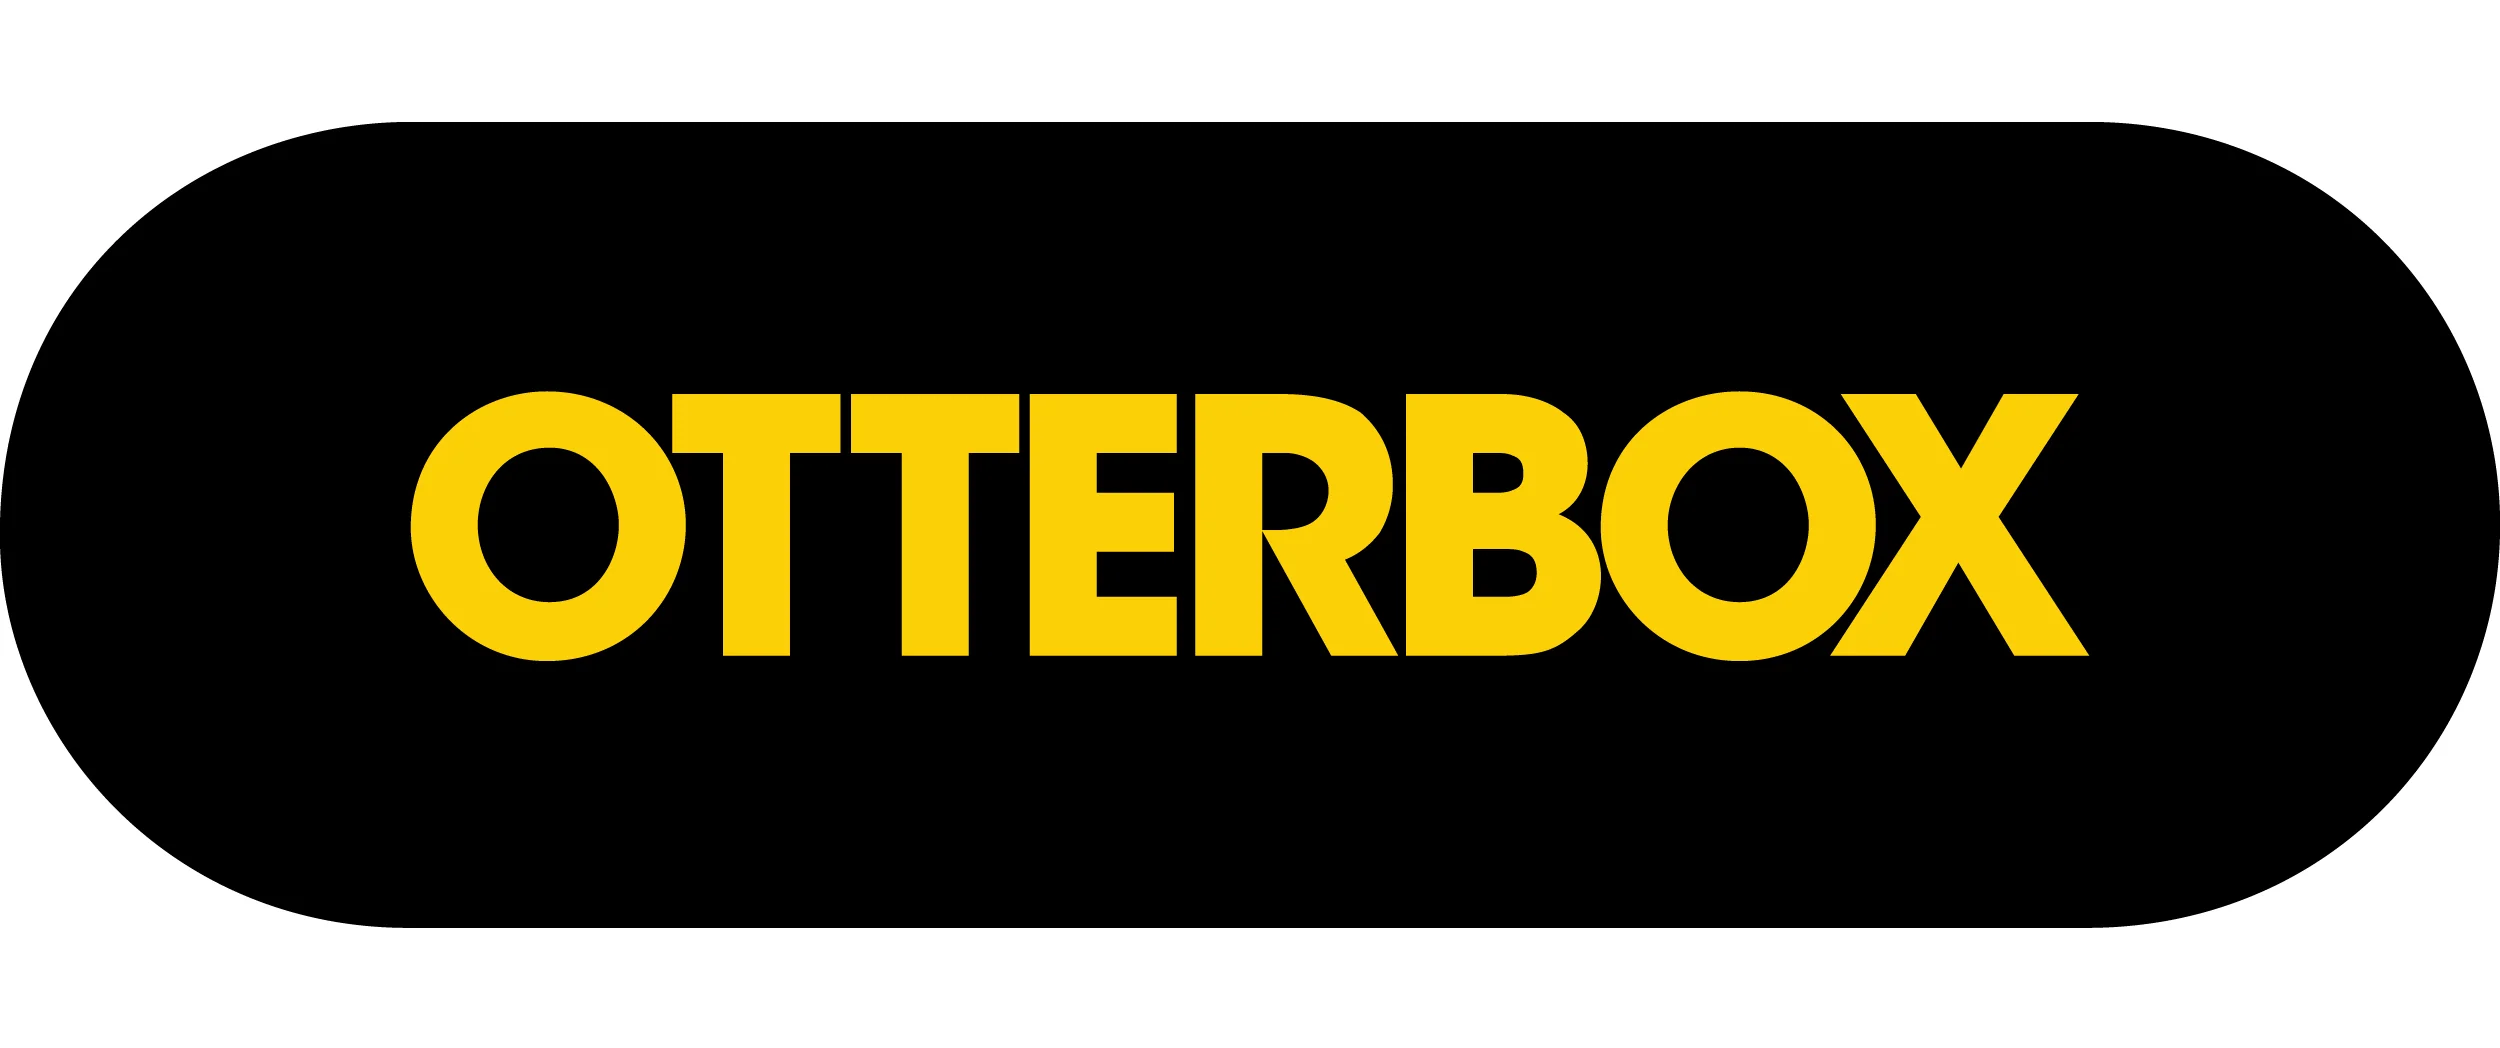 Otterbox Coupons & Promo Codes